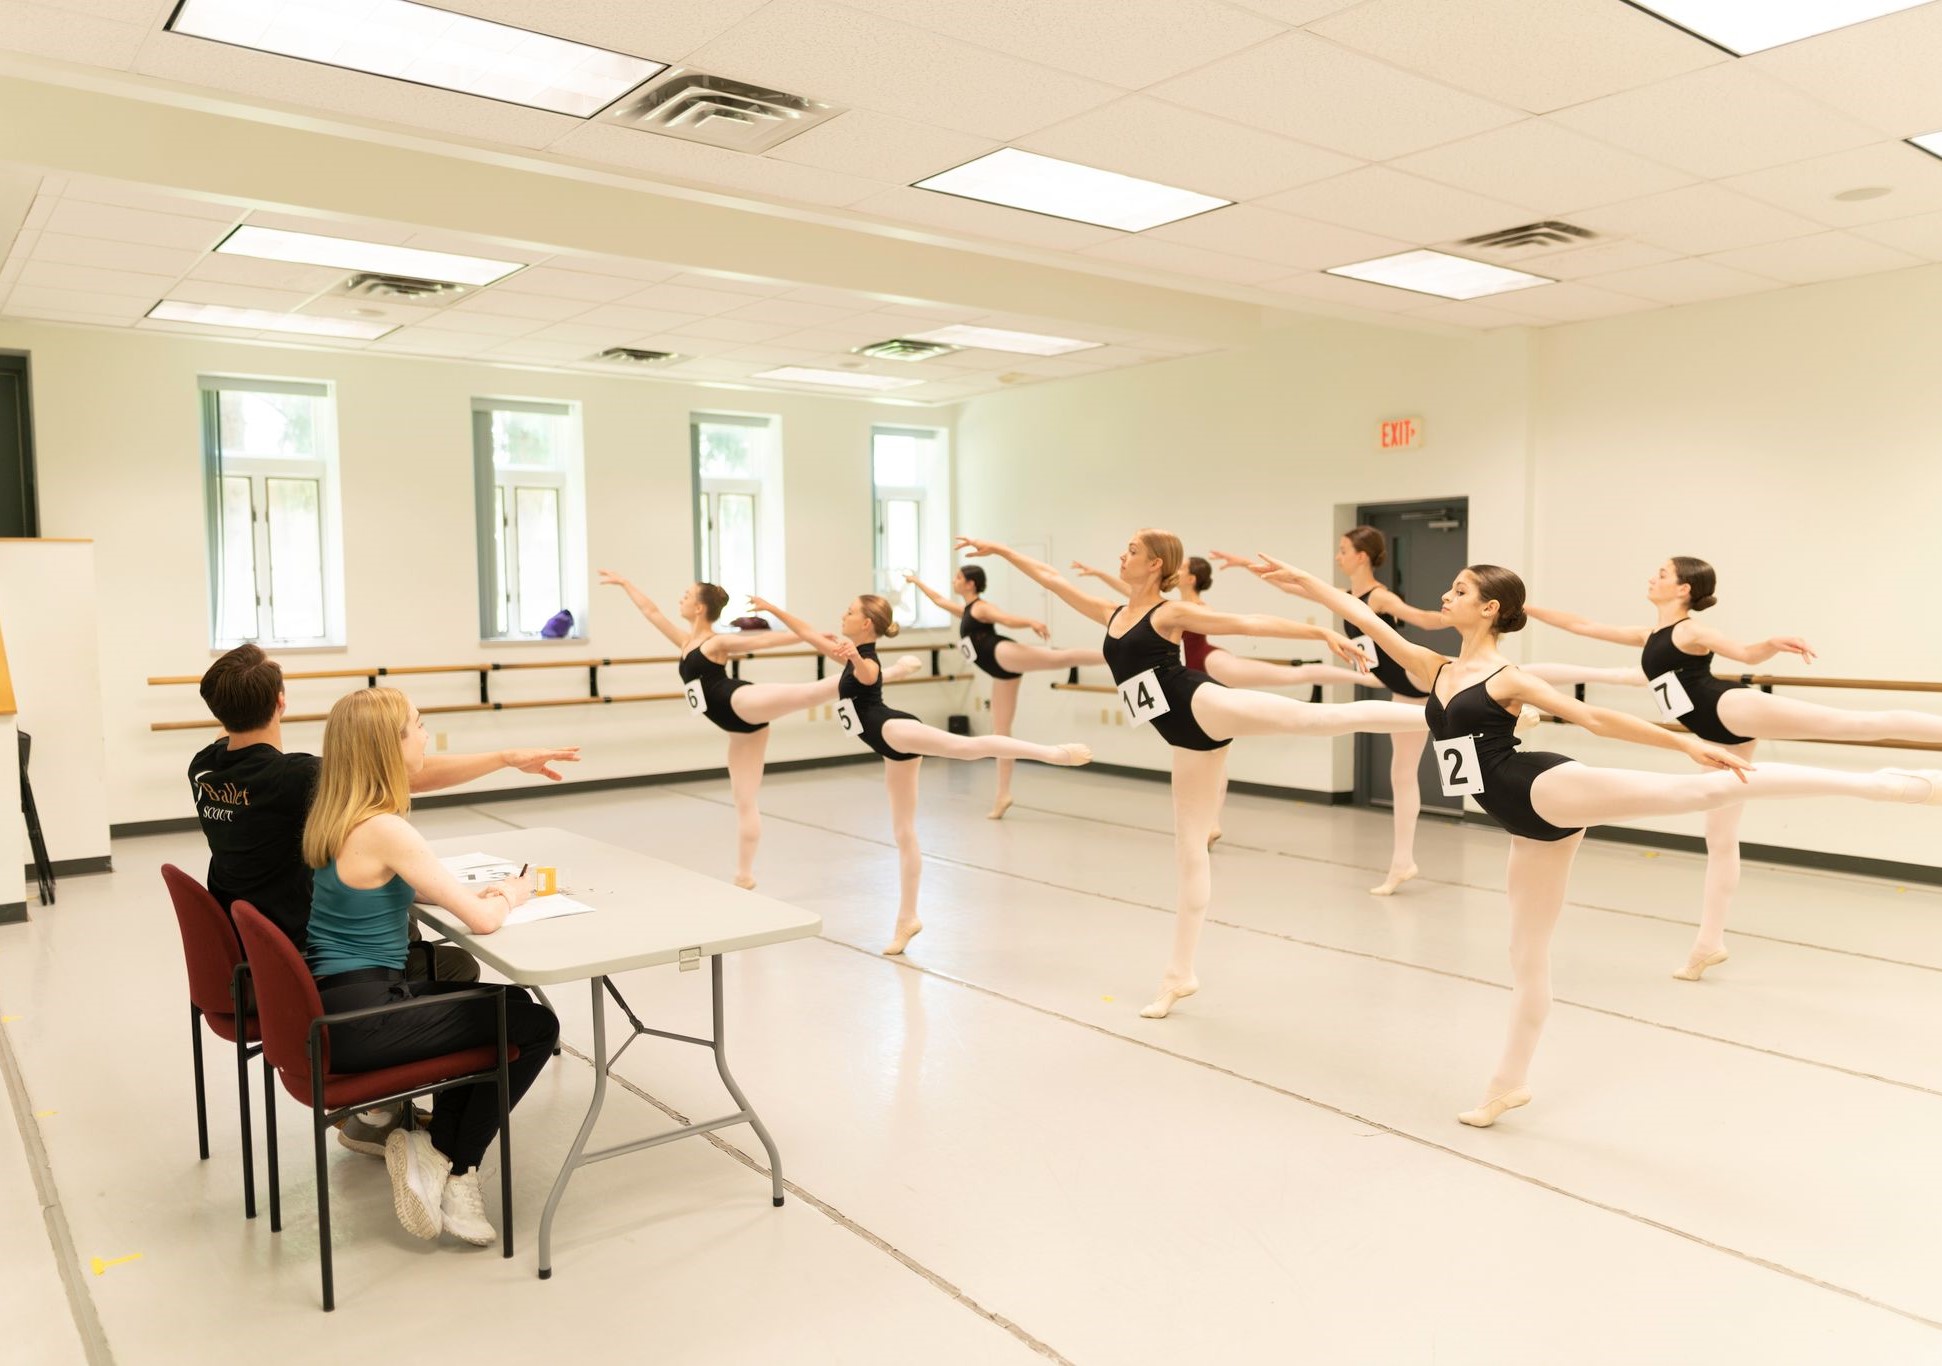 Ballerinas at an audition